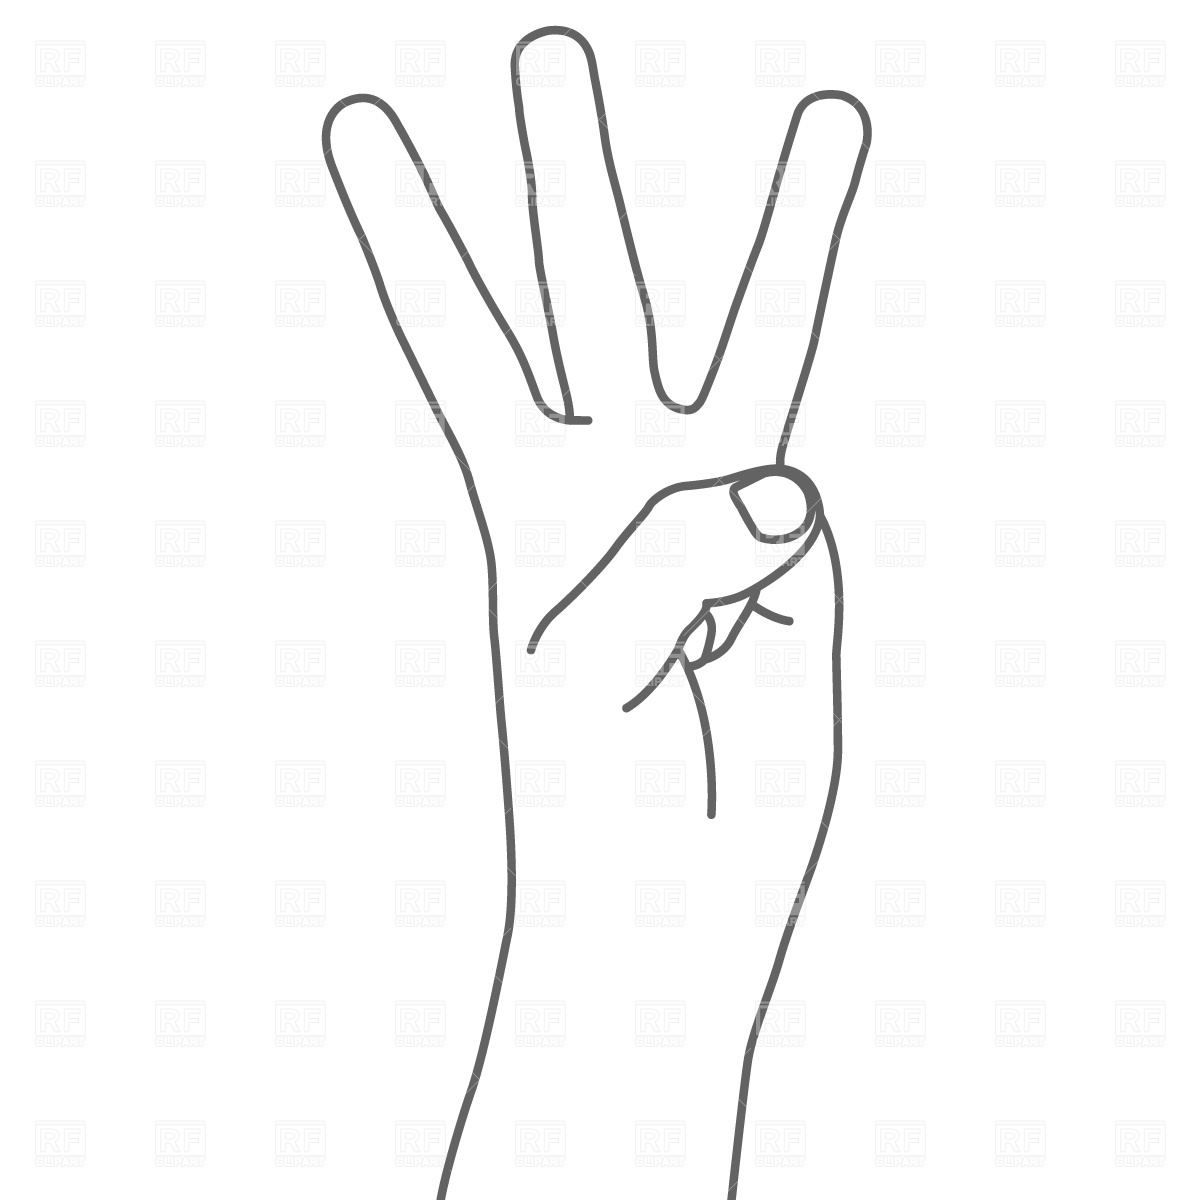 Three Fingers Hand Sign 698 Signs Symbols Maps Download Royalty